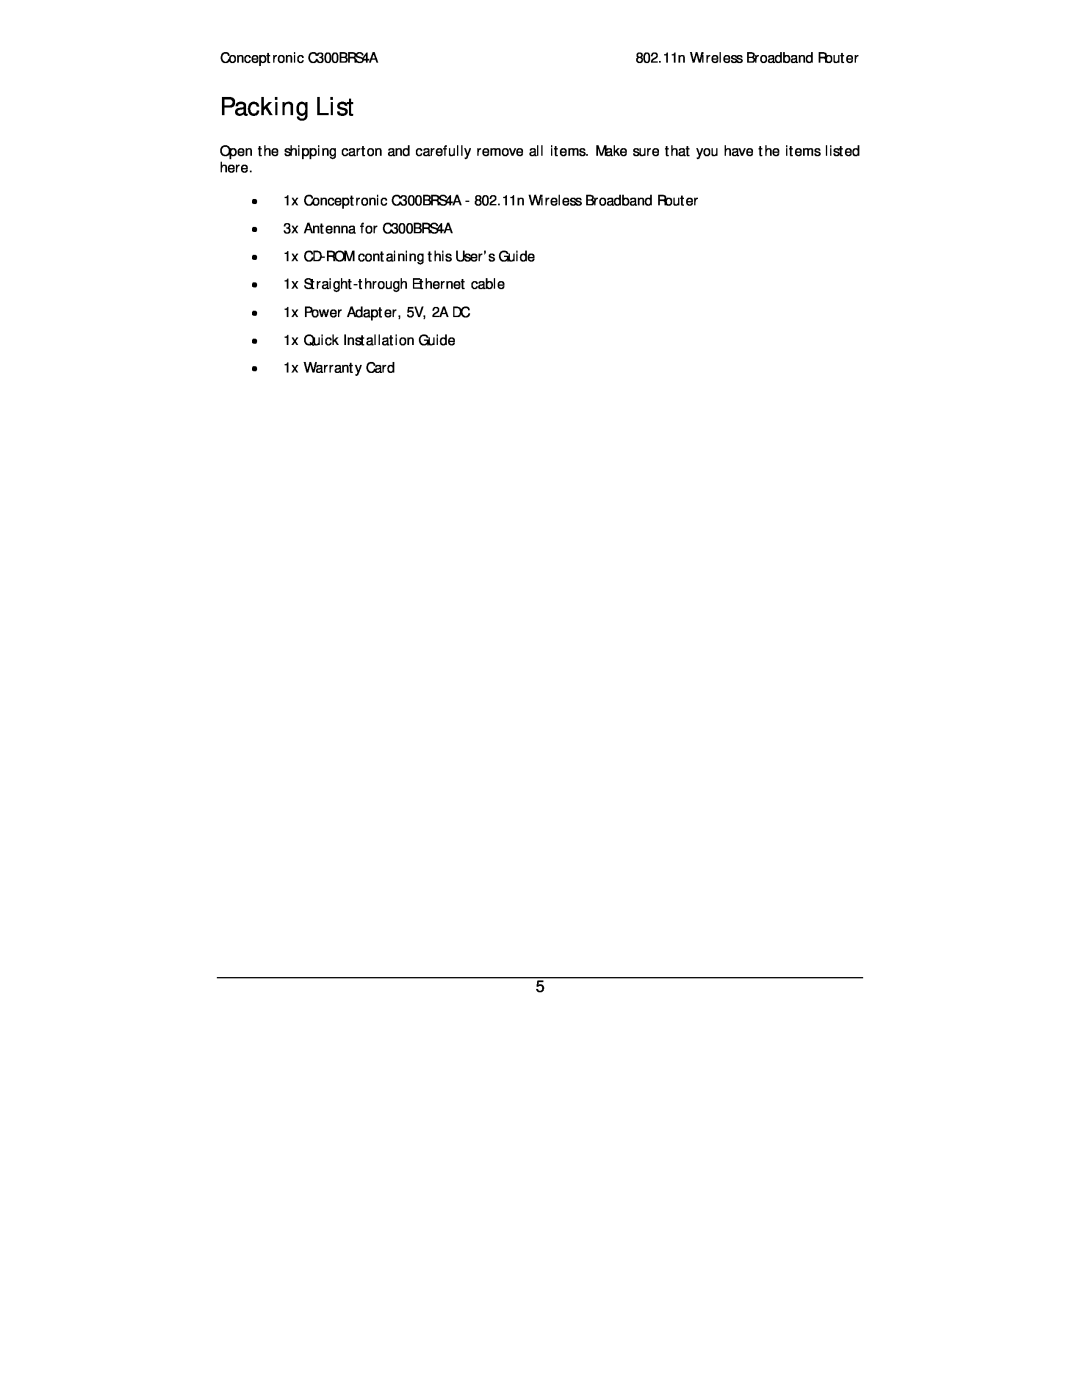 Conceptronic user manual Packing List, 1x Conceptronic C300BRS4A - 802.11n Wireless Broadband Router 